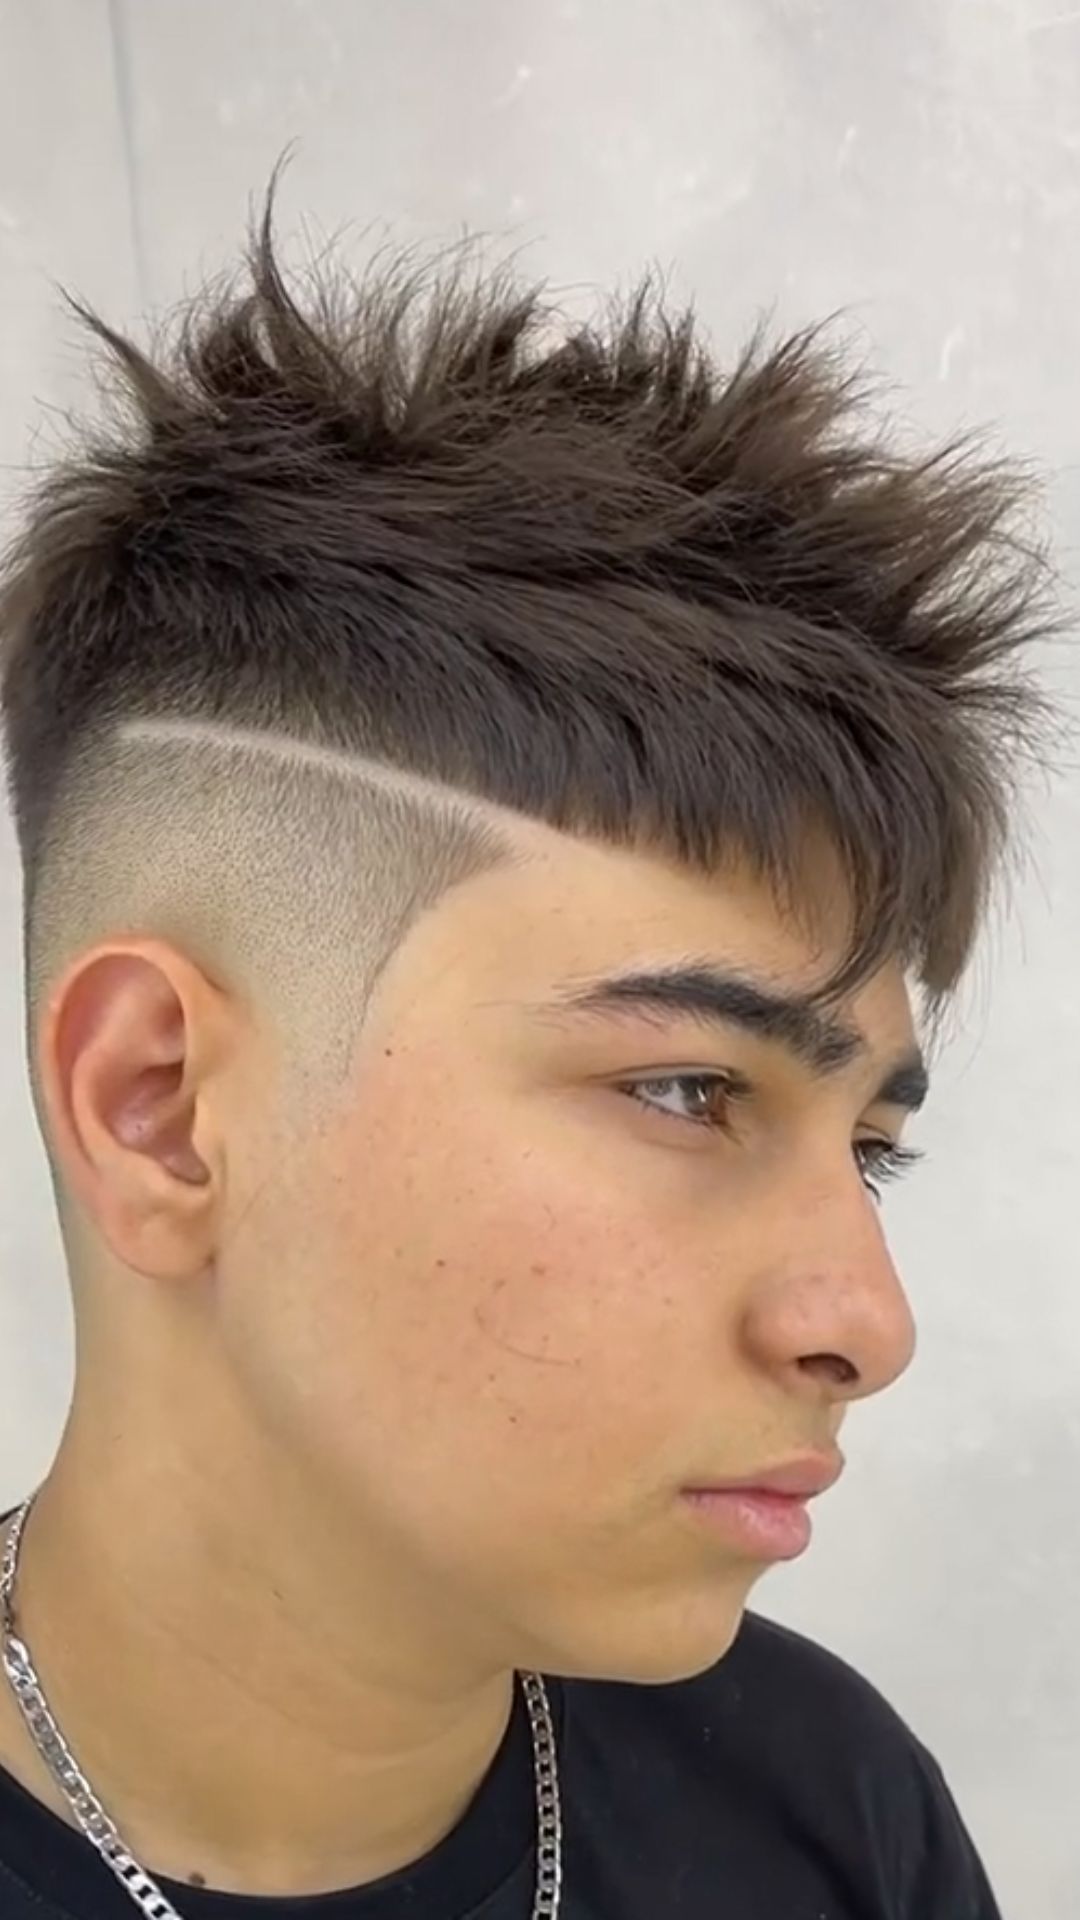 A teenage boy with a crop haircut with a hard part.